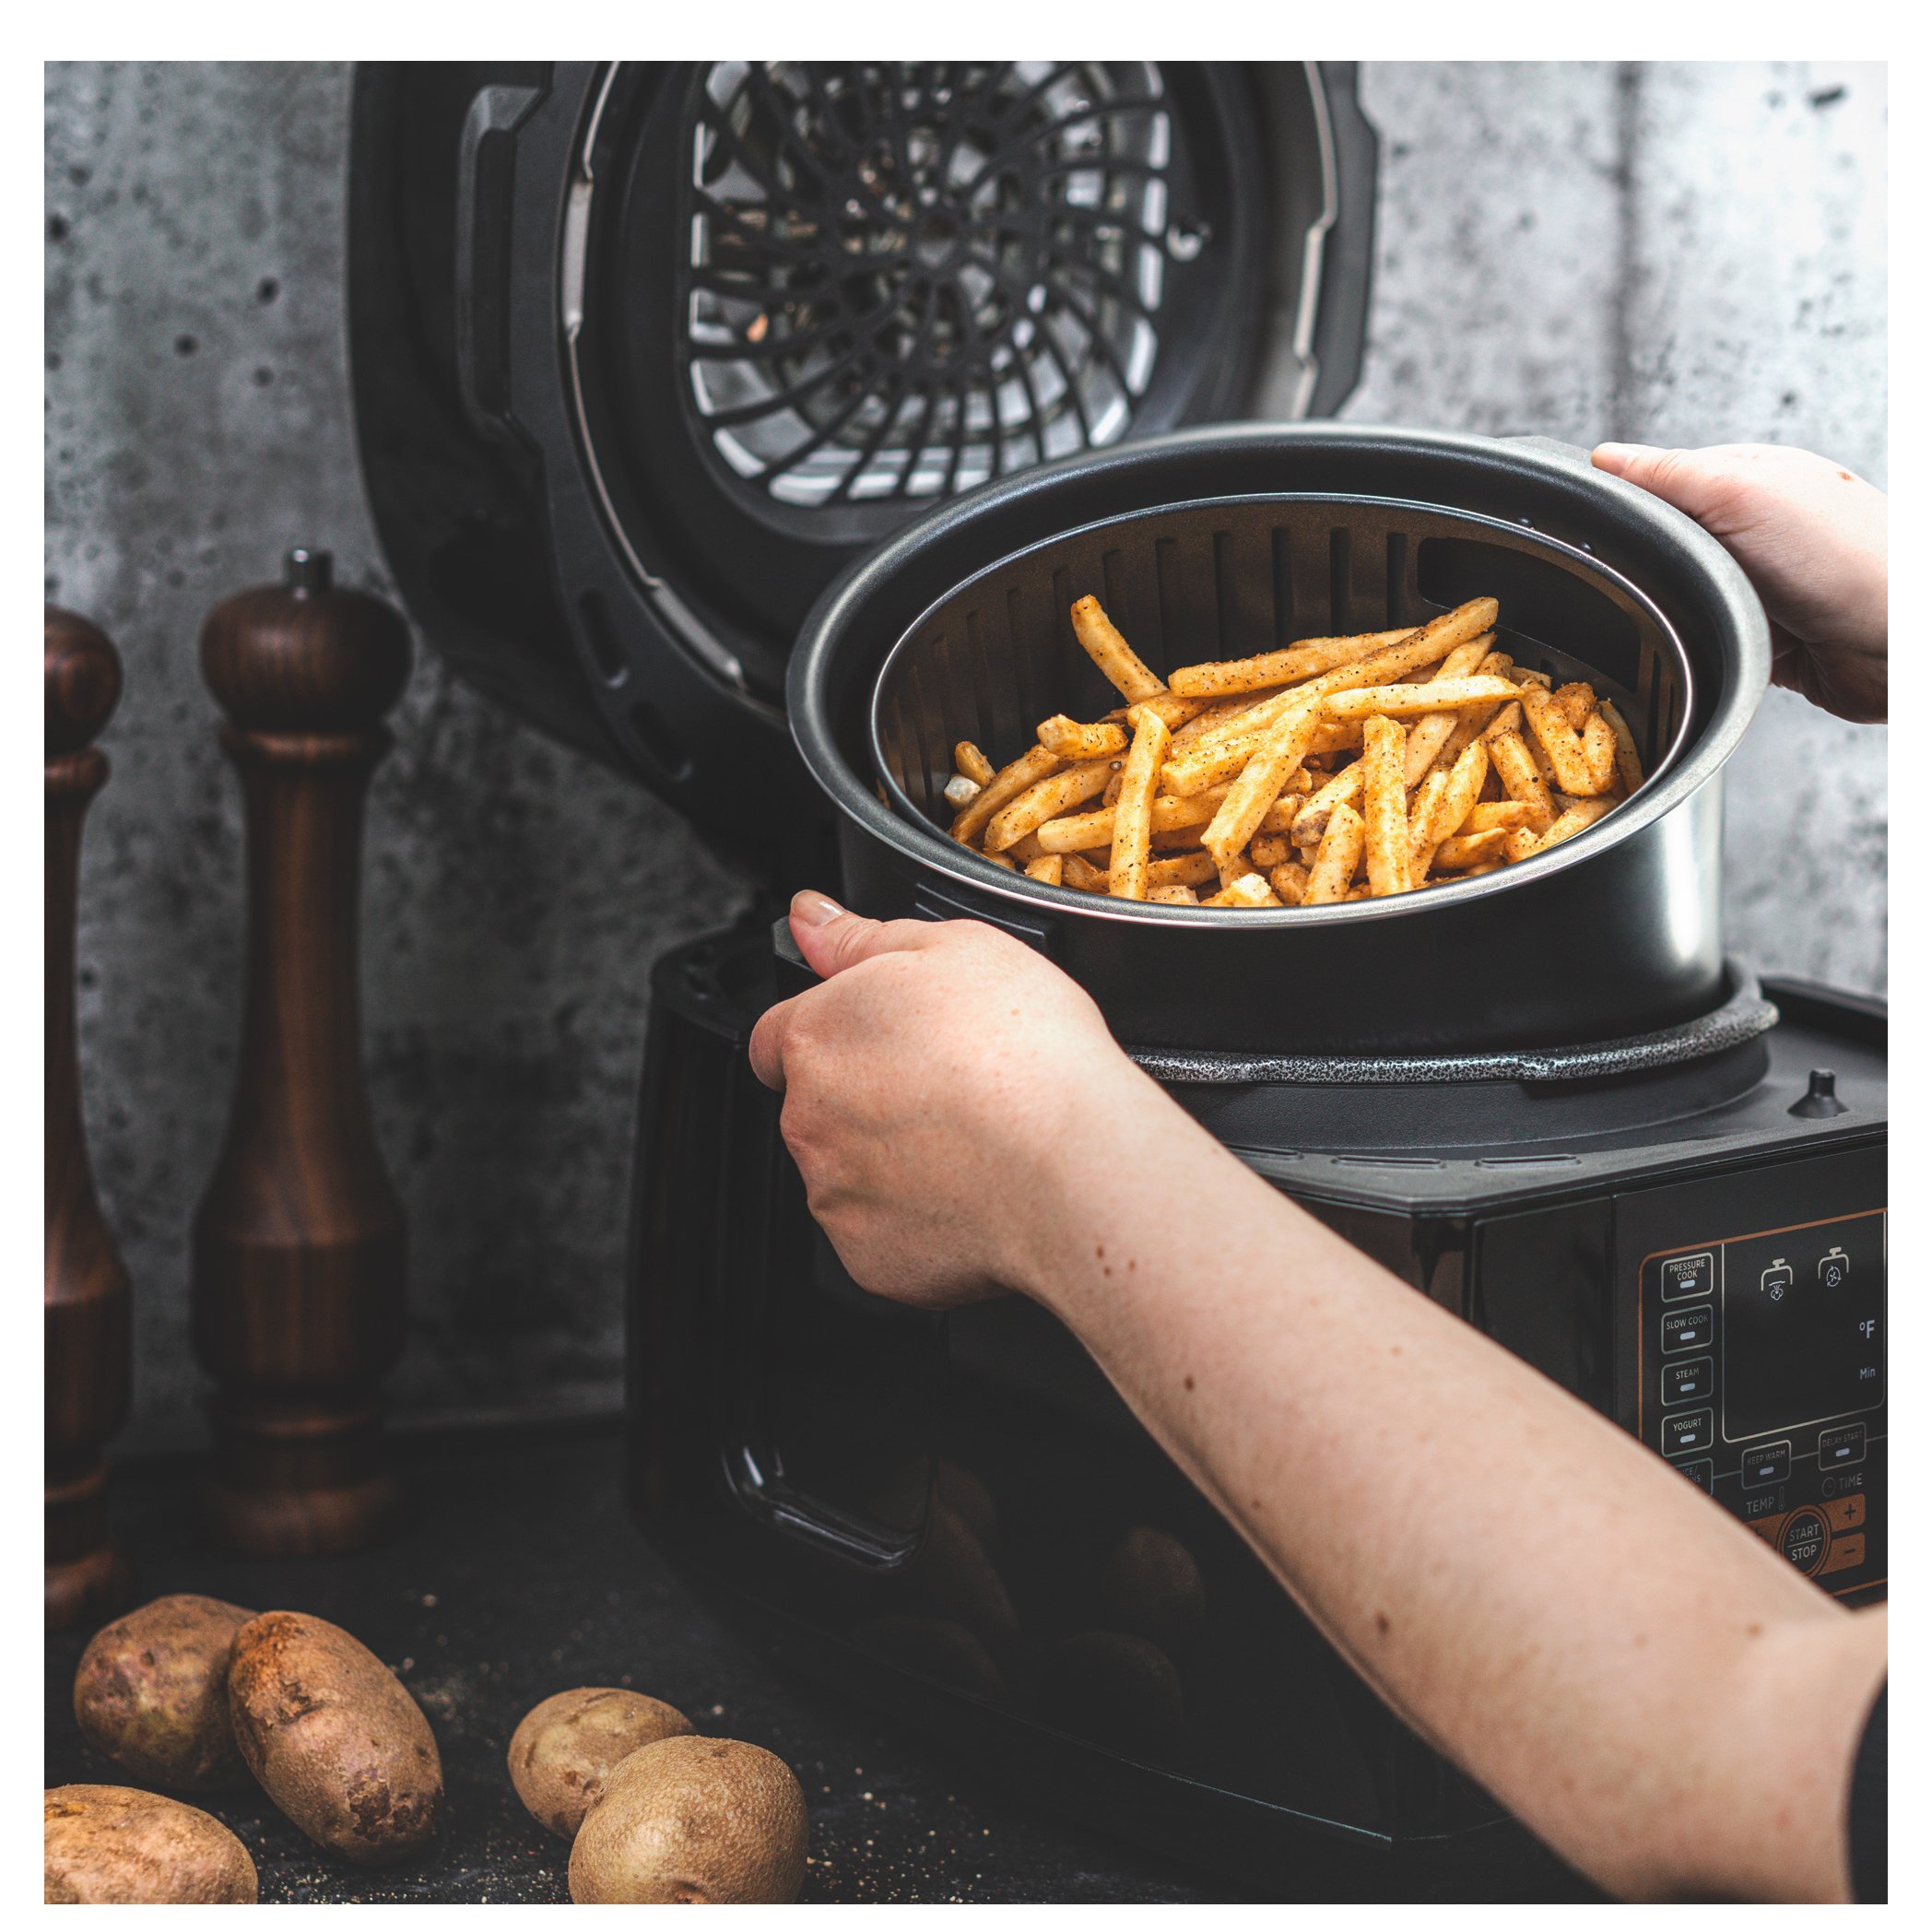 PowerXL Vortex Air Fryer - Slate - Shop Cookers & Roasters at H-E-B